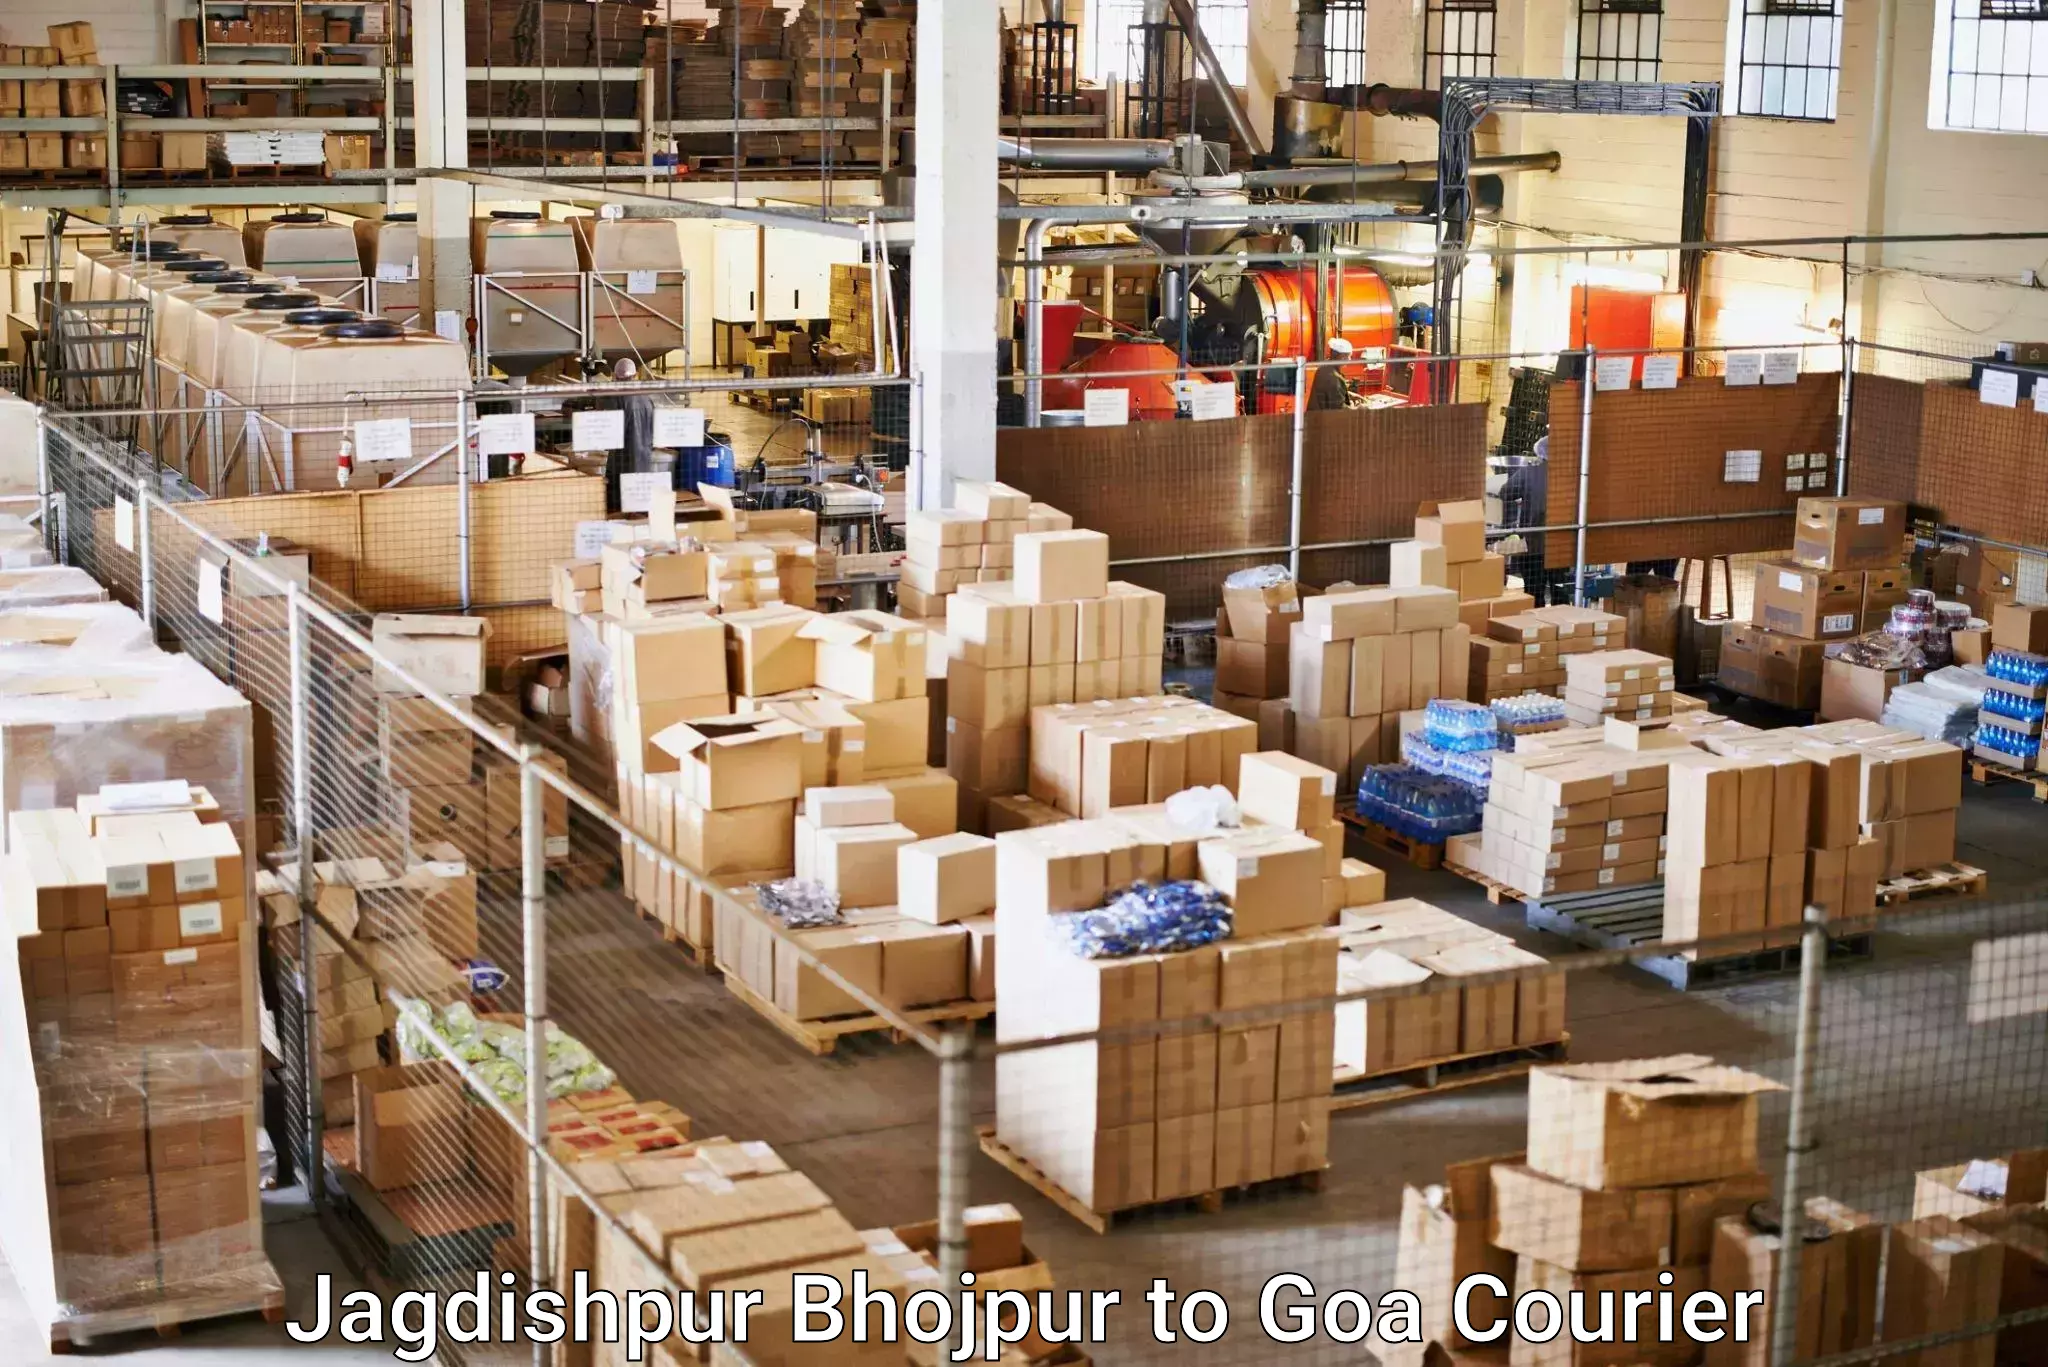 Sustainable courier practices Jagdishpur Bhojpur to Goa